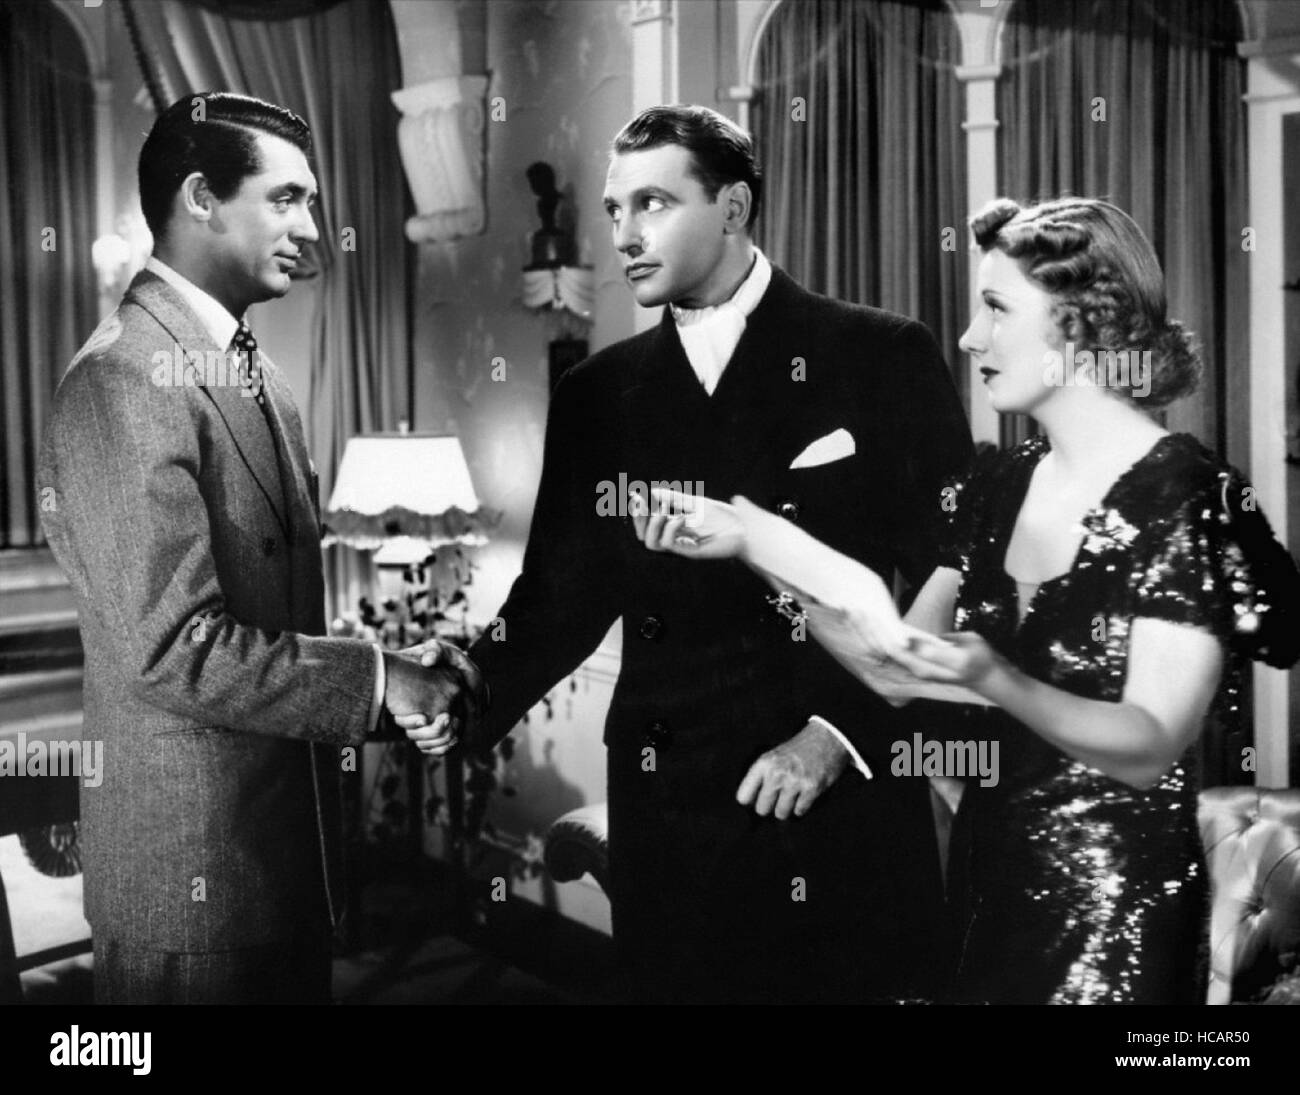 THE AWFUL TRUTH, from left: Cary Grant, Ralph Bellamy, Irene Dunne ...